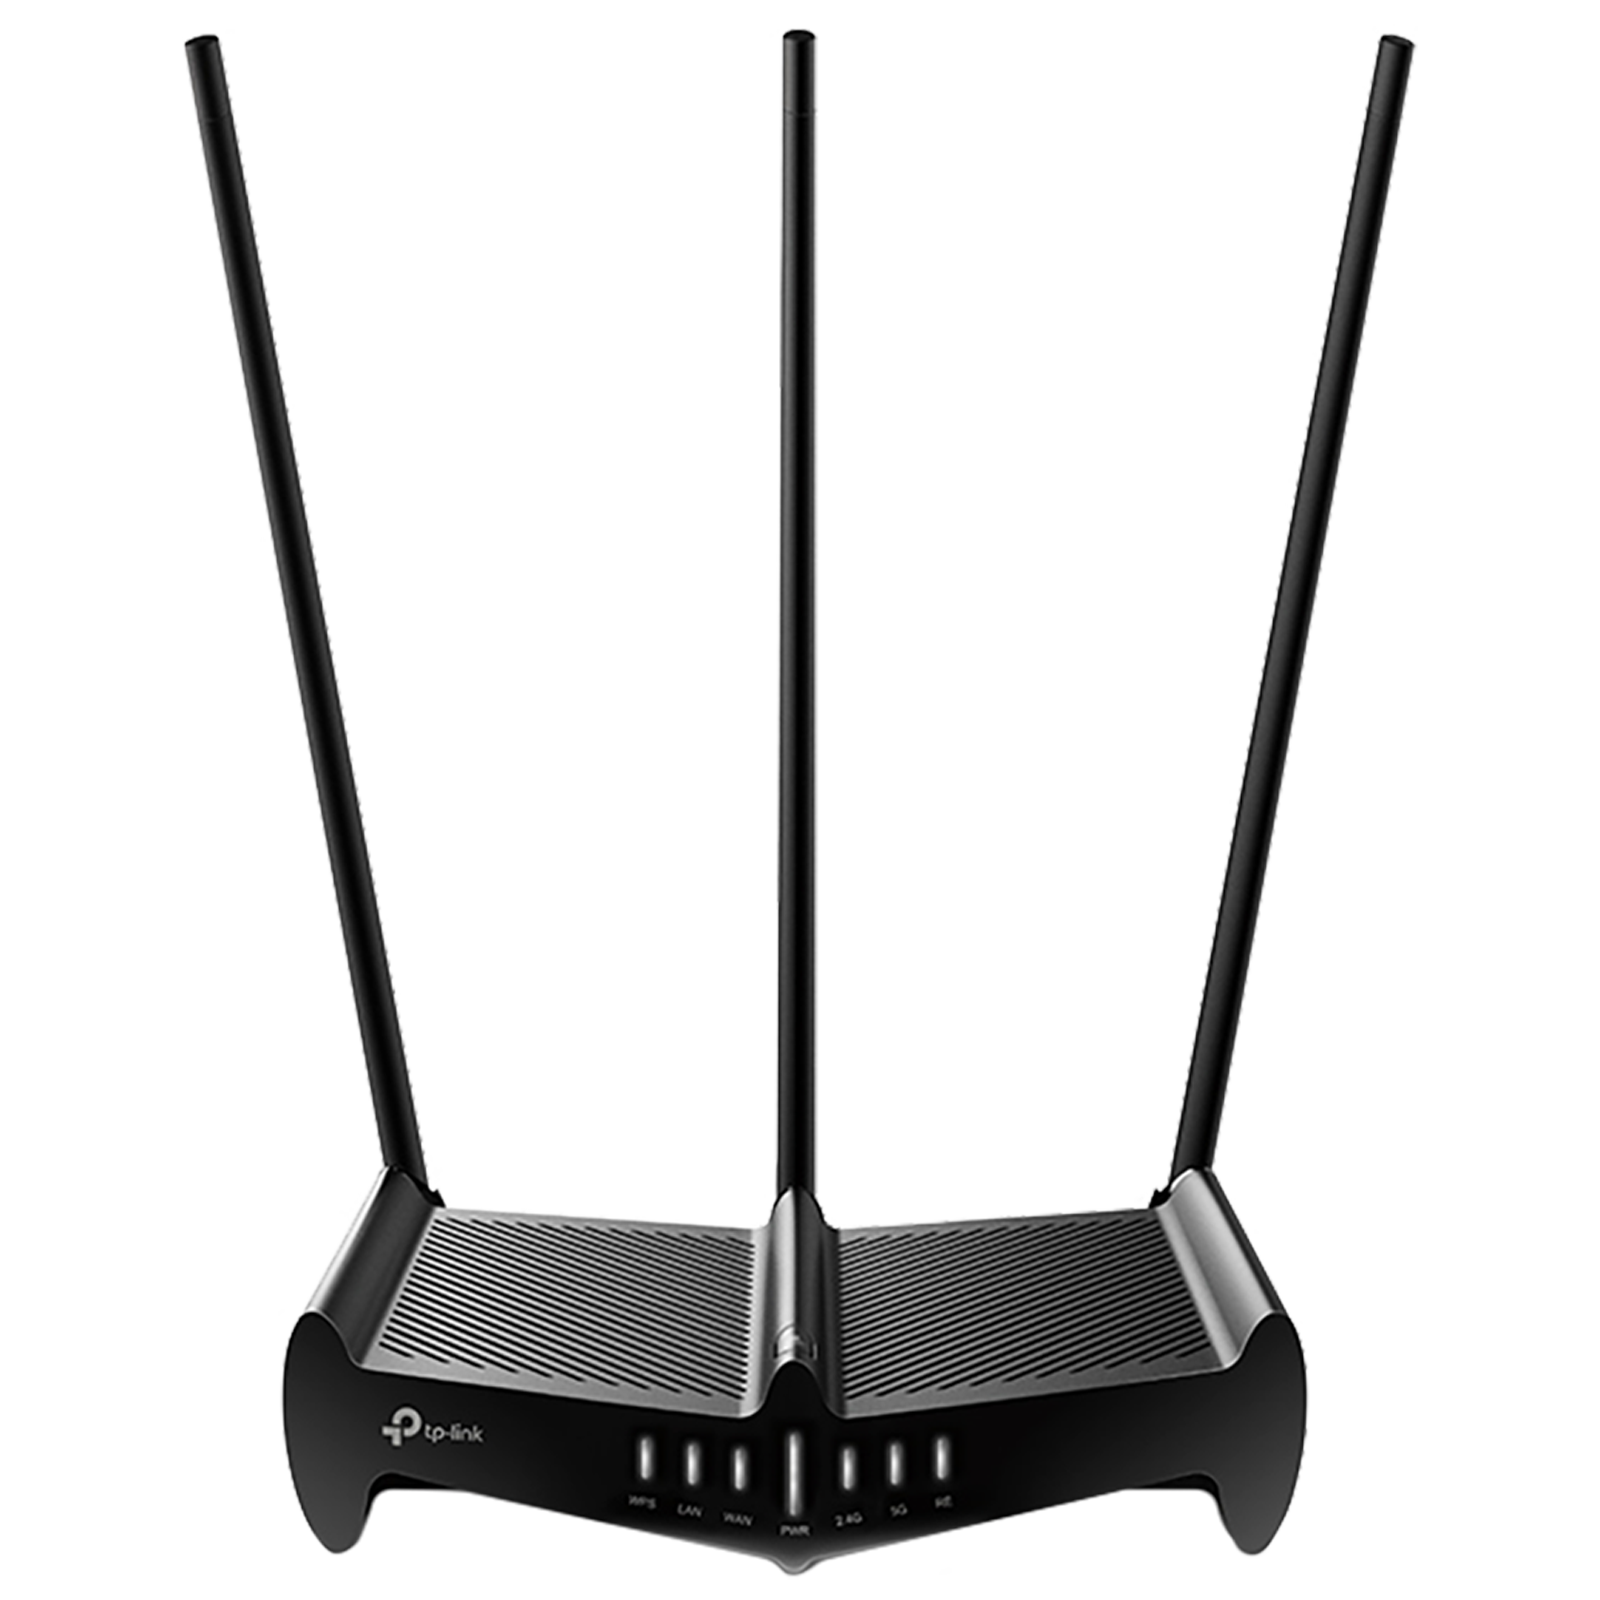 Tp-Link Archer C58HP AC1350 Dual Band Wi-Fi Router (3 Antennas, 4 LAN Ports, IPv6 Supported, 1750502289, Black)_1